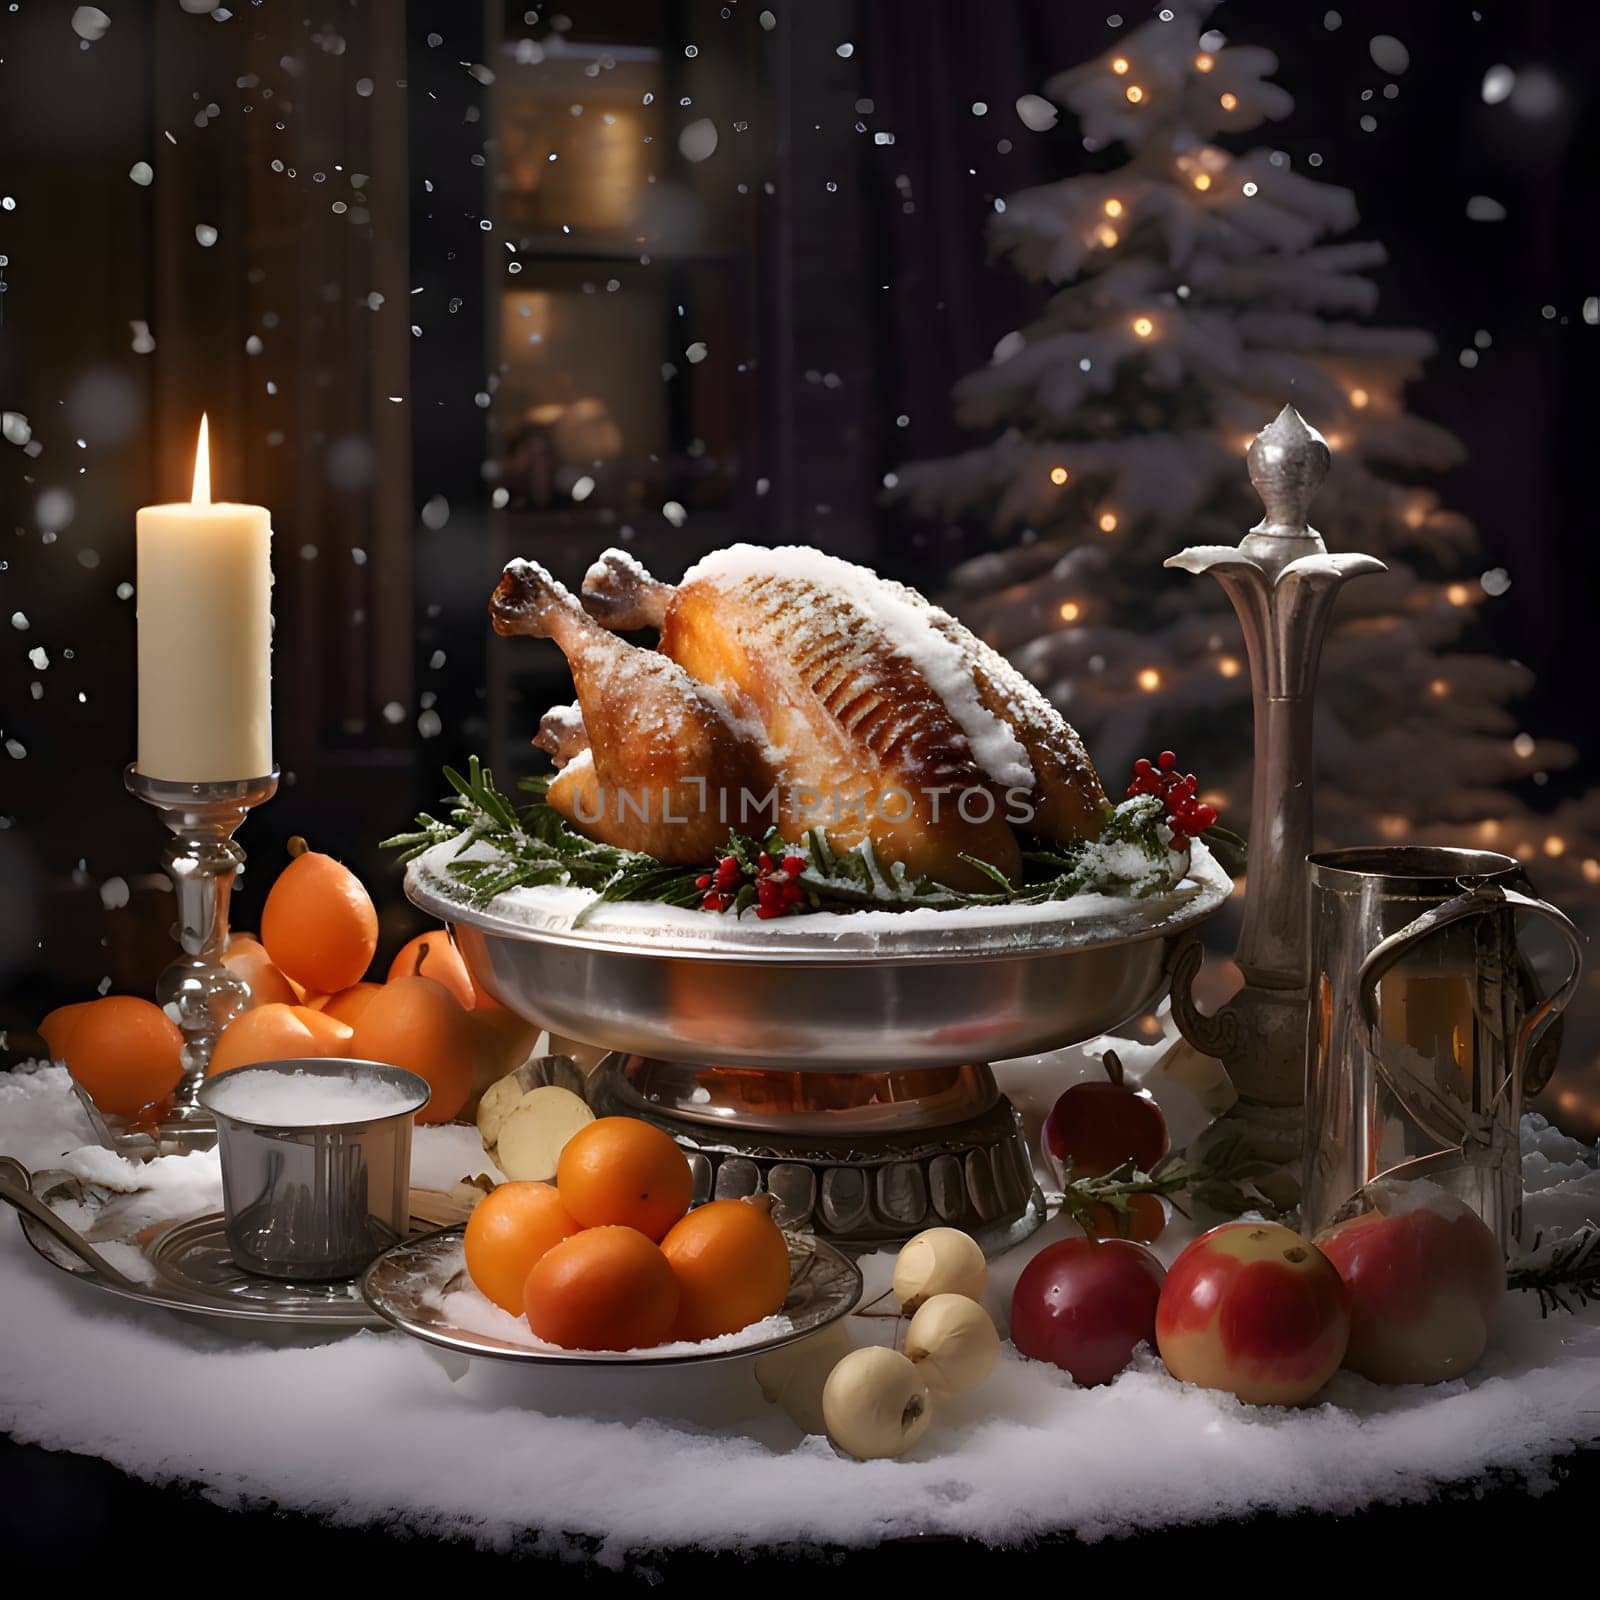 Roast turkey vegetables fruits falling snow and Christmas tree. Turkey as the main dish of thanksgiving for the harvest. by ThemesS